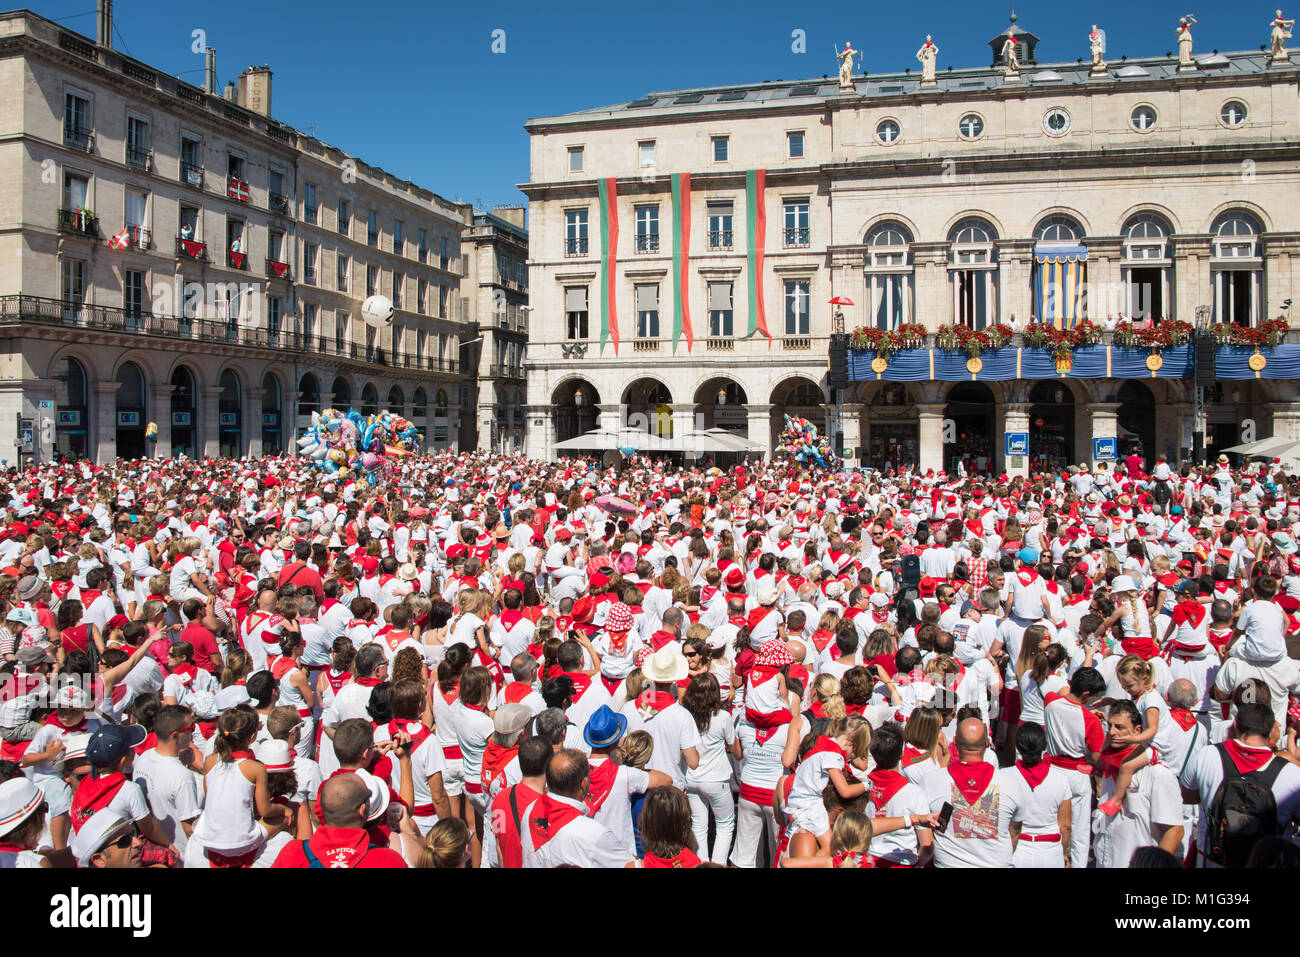 Crowd of people dressed in white and red at the Summer festival of Bayonne (Fetes de Bayonne), France Stock Photo